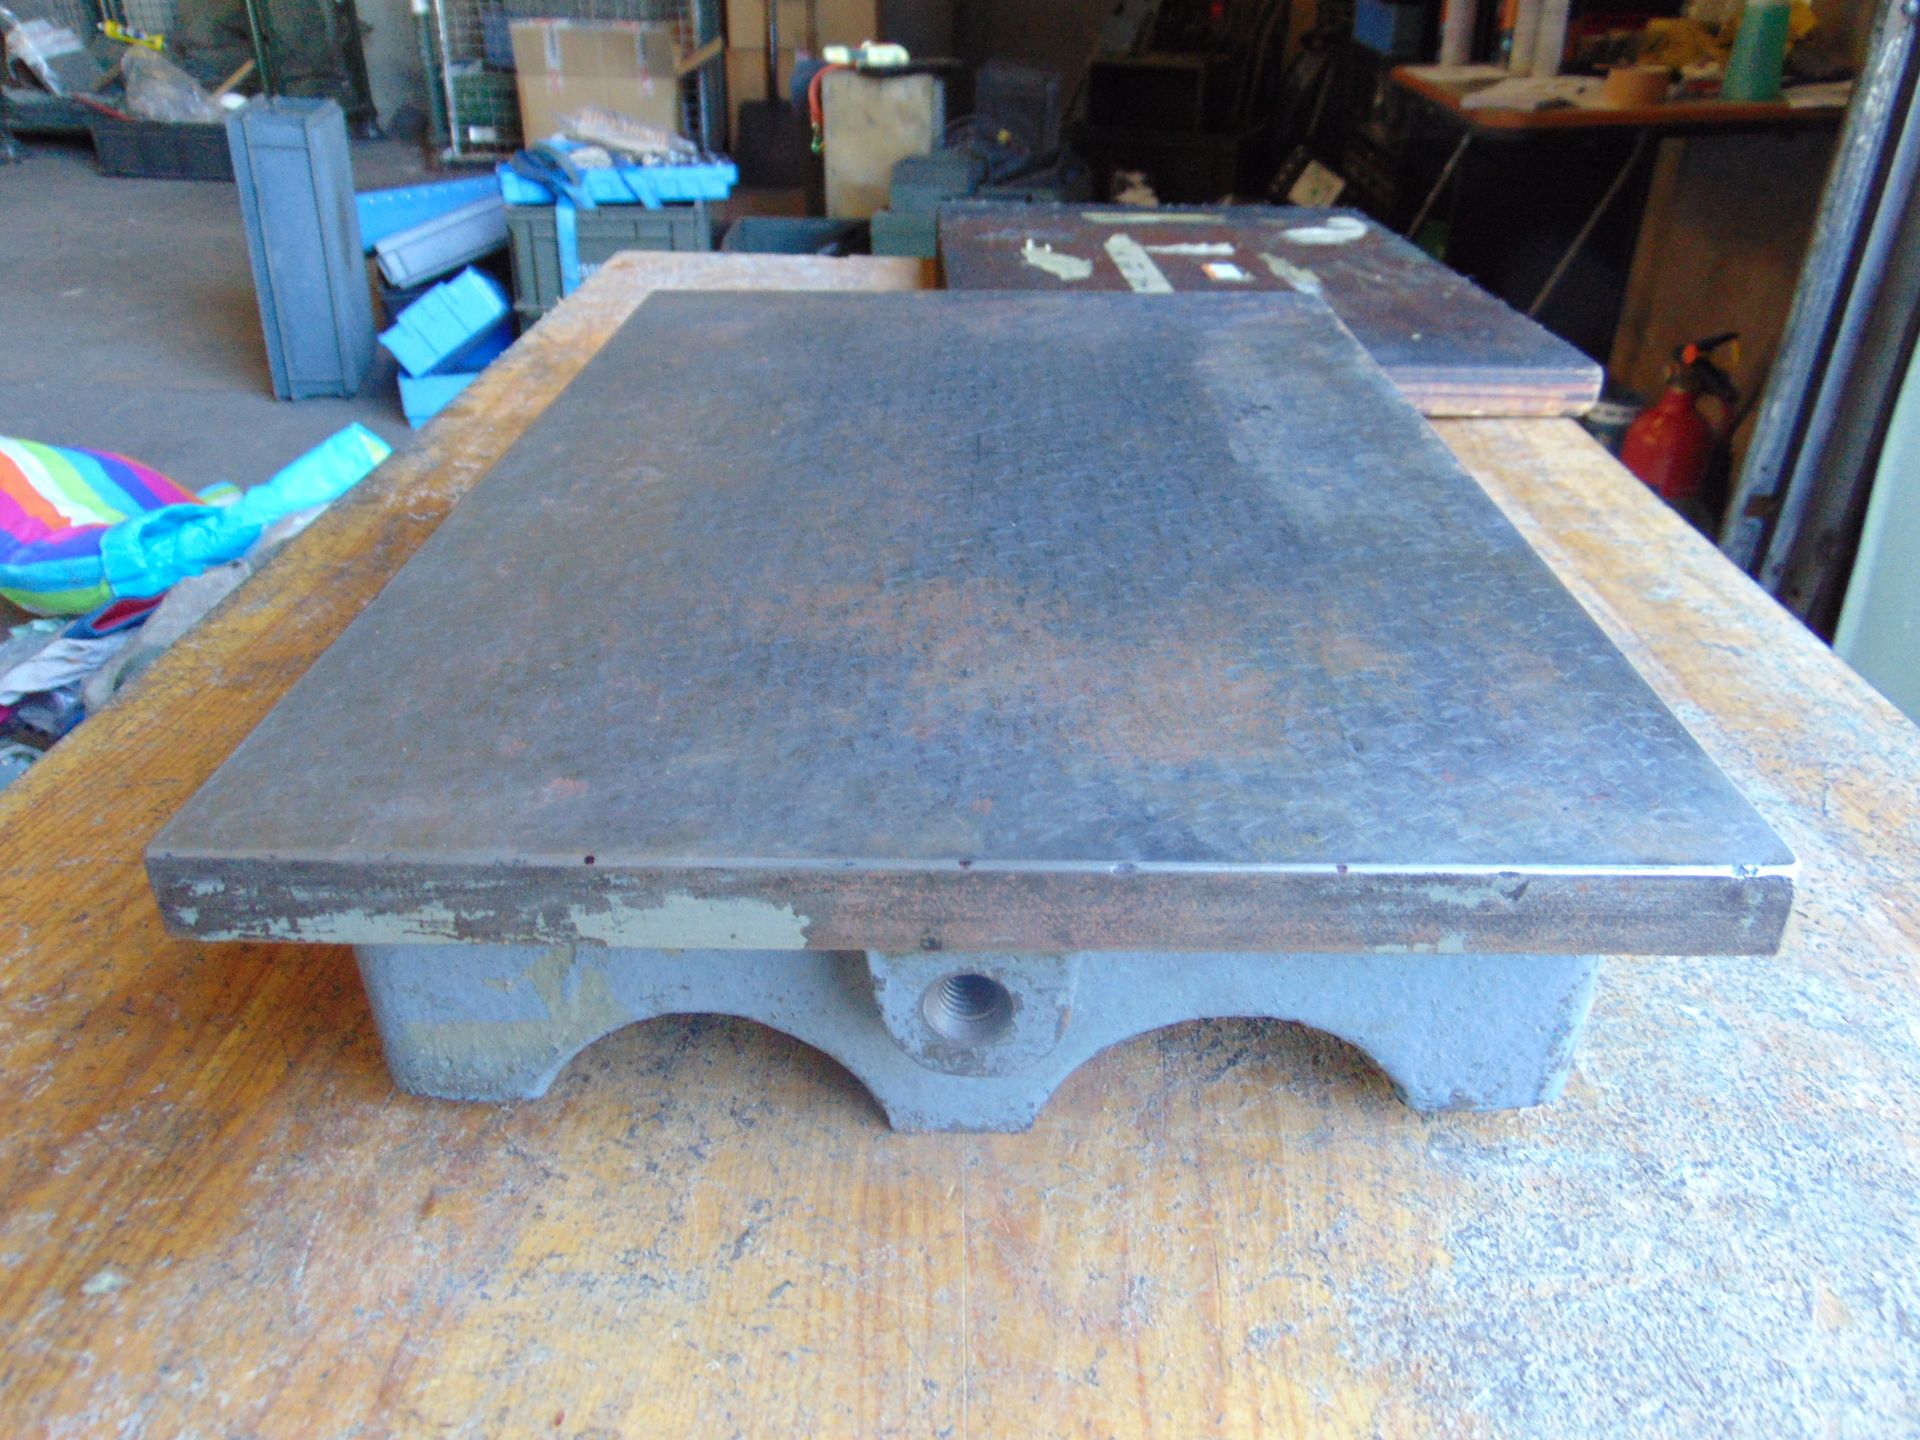 Crown Windley Bros Cast Iron Engineering Surface Plate 18" x 12" - Image 5 of 11